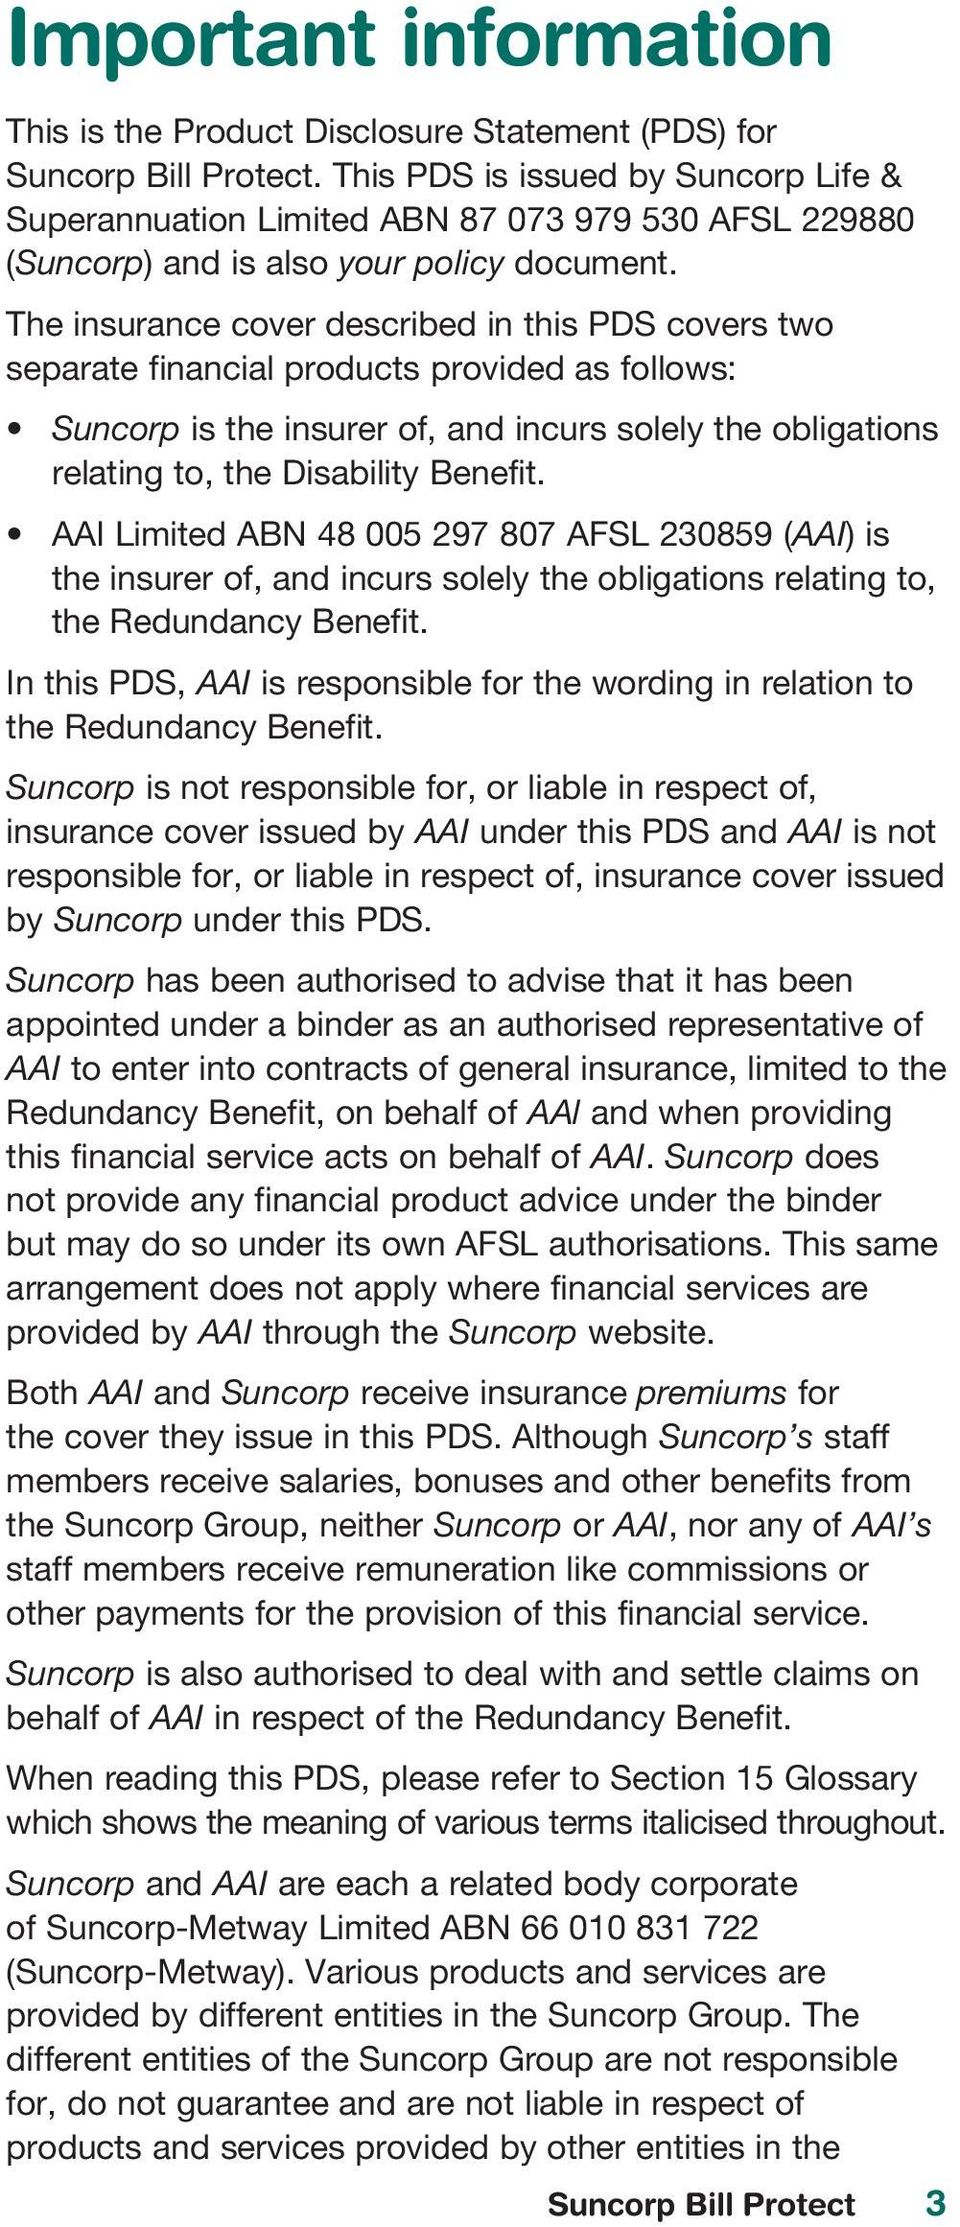 The insurance cover described in this PDS covers two separate financial products provided as follows: Suncorp is the insurer of, and incurs solely the obligations relating to, the Disability Benefit.